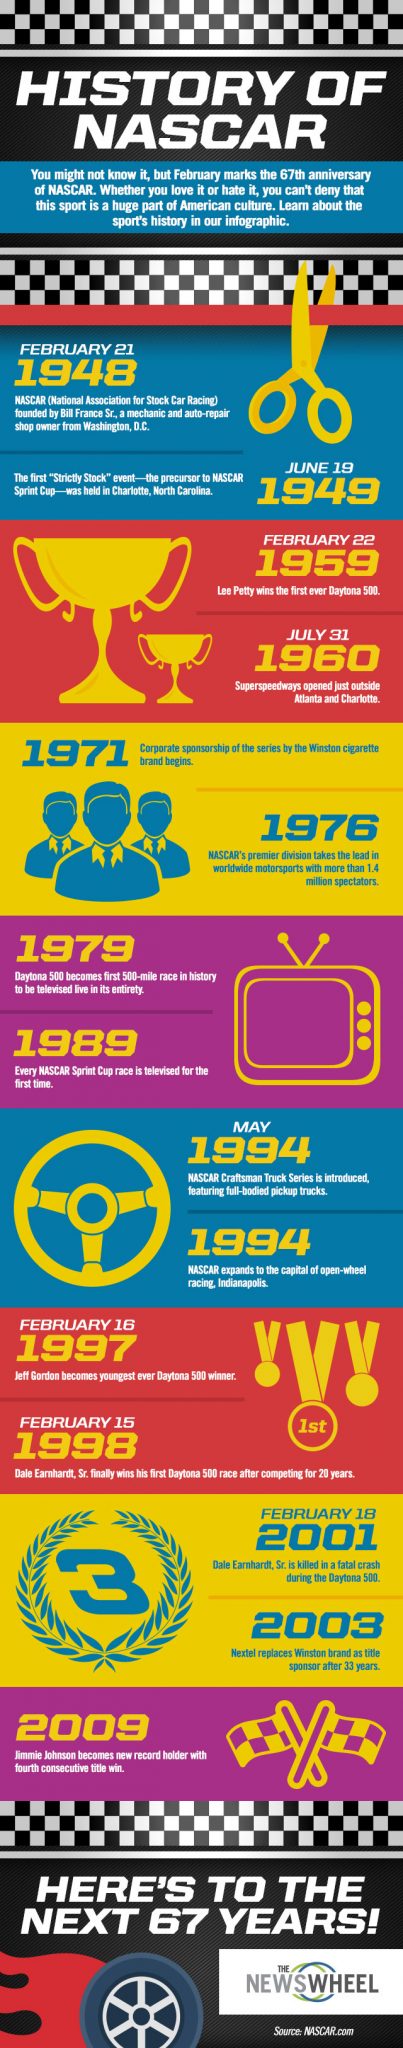 History of NASCAR infographic